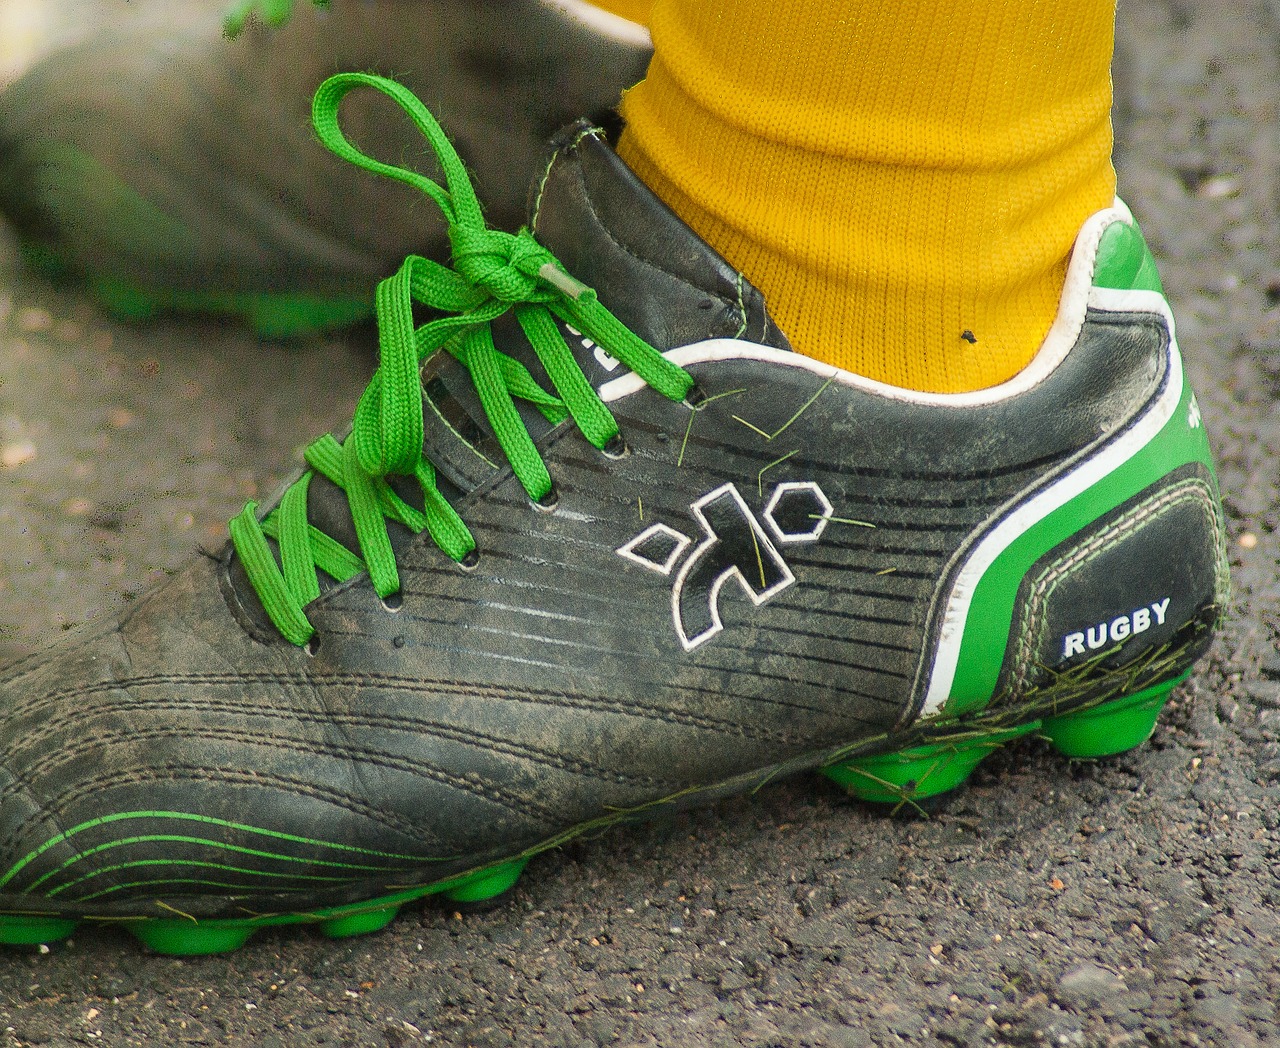 rugby shoes laces free photo